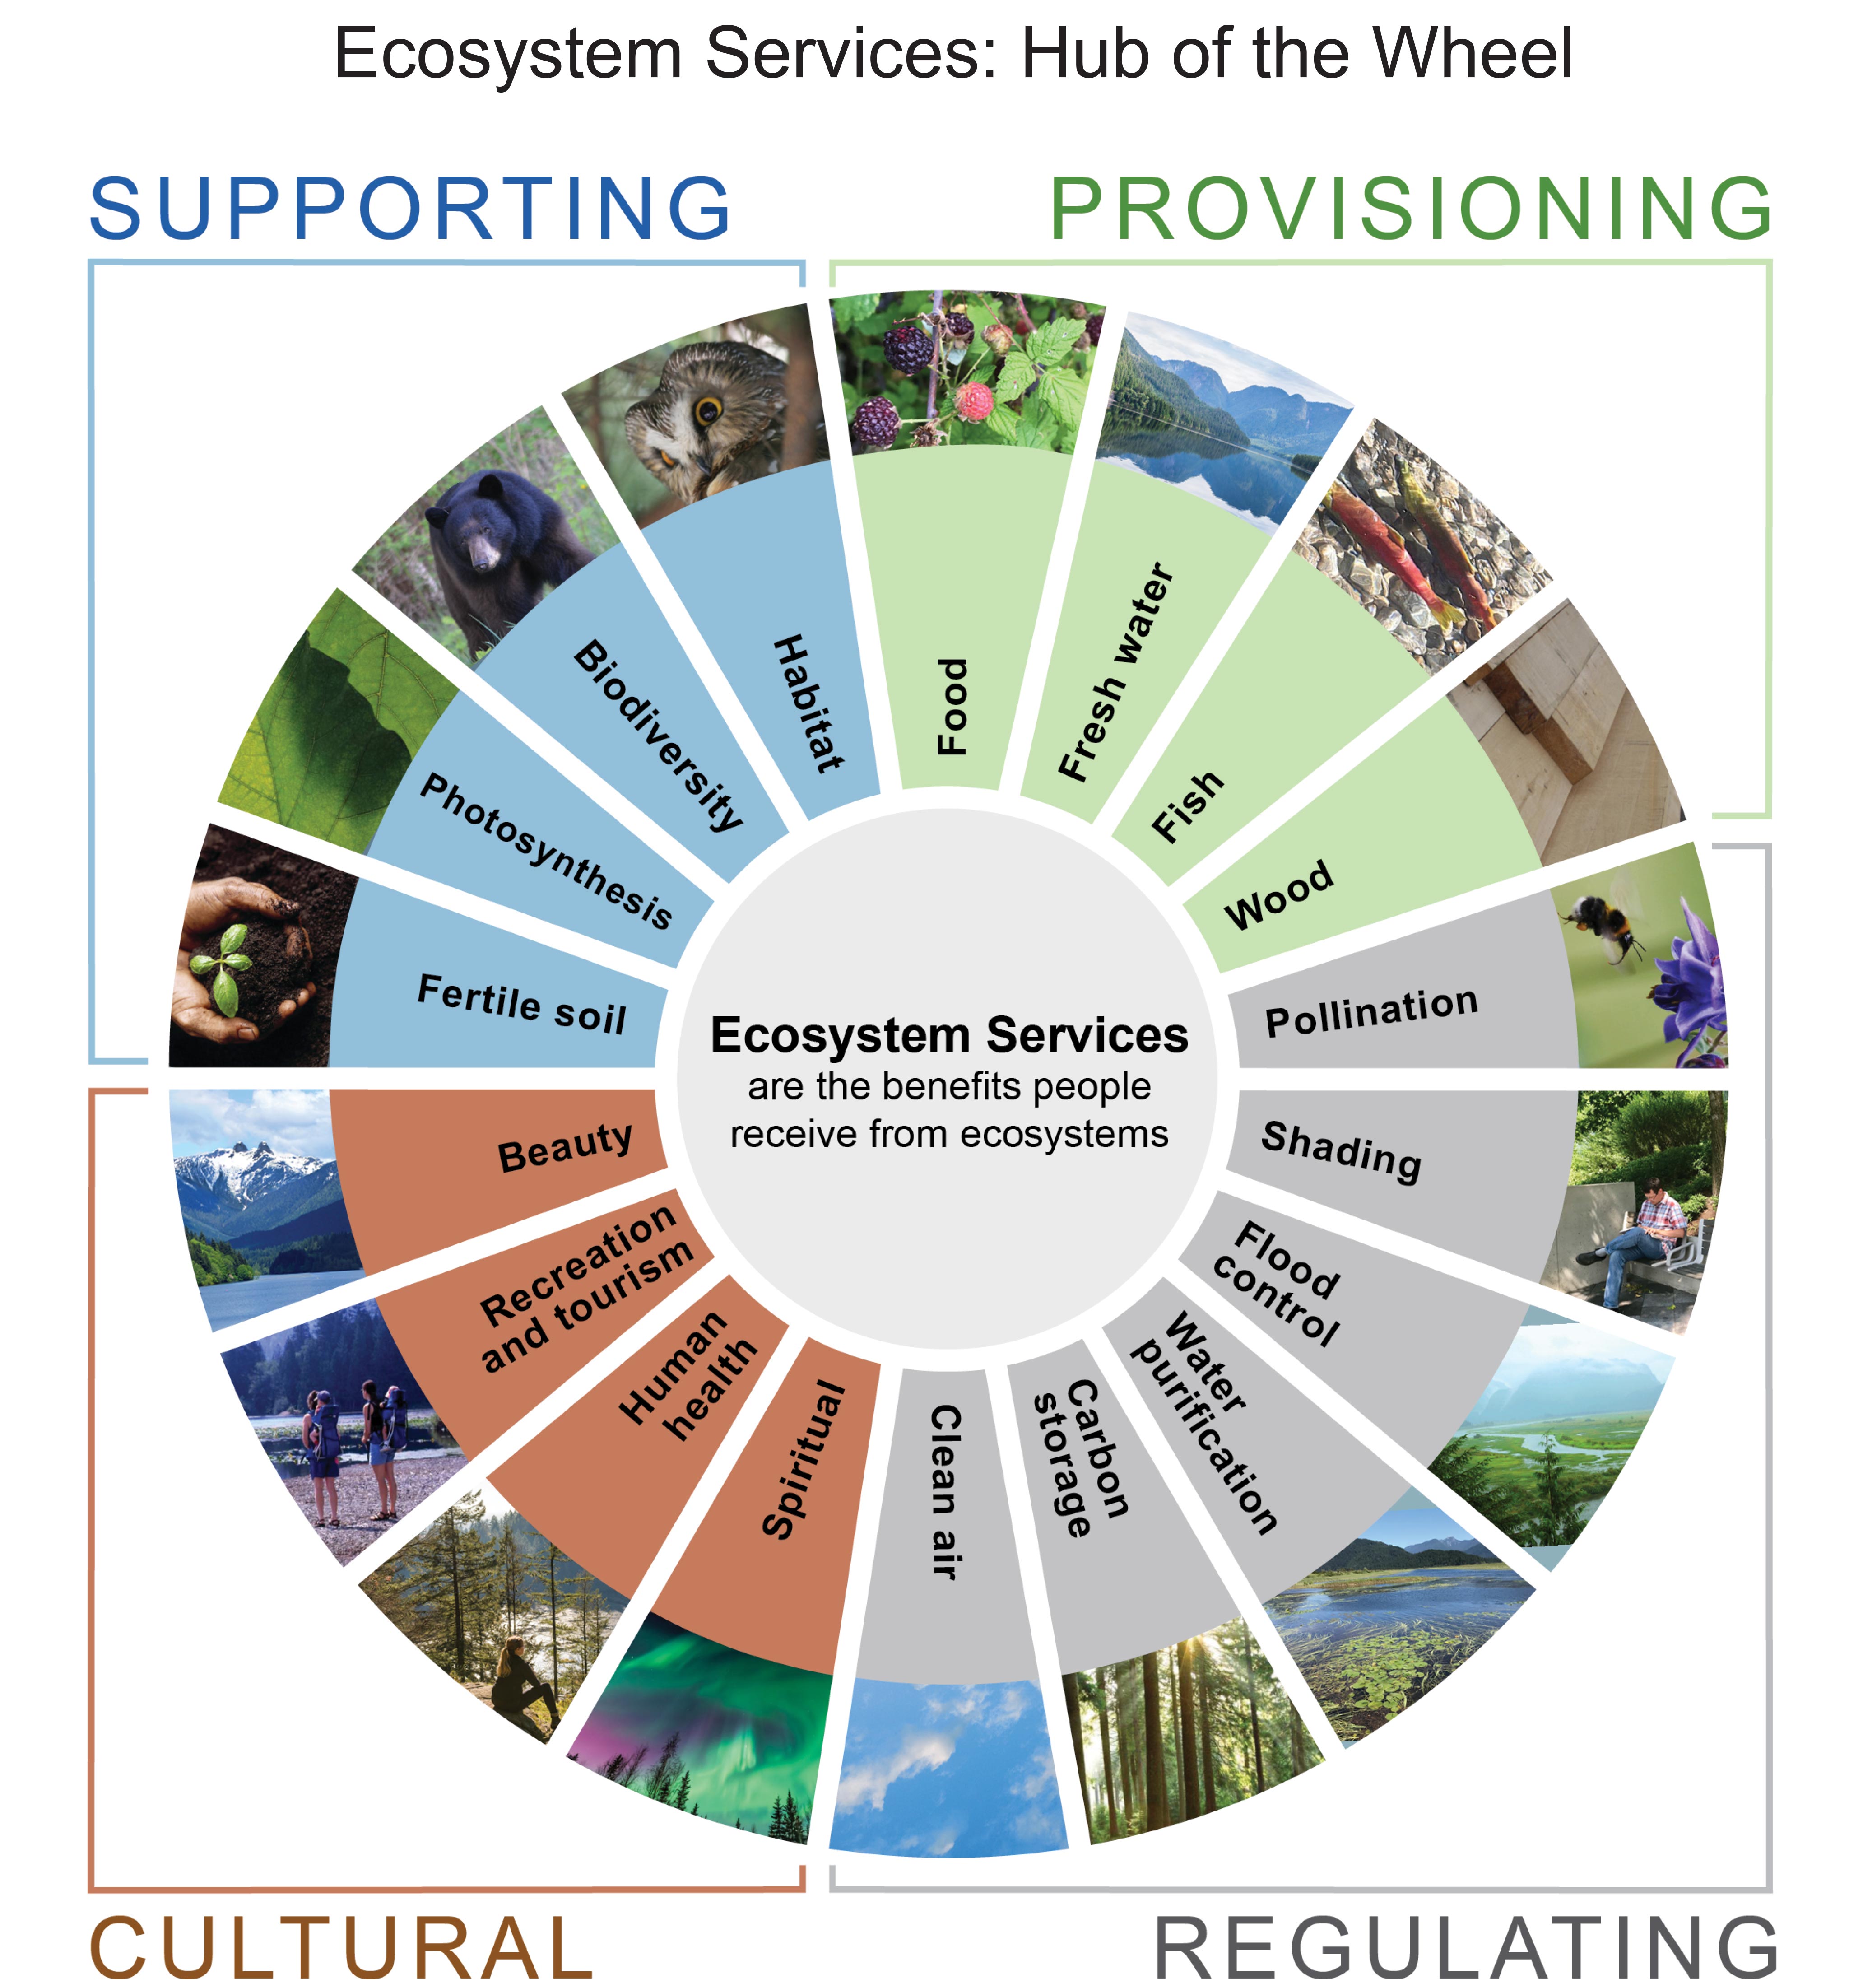 Ecosystem Services: Hub of the Wheel